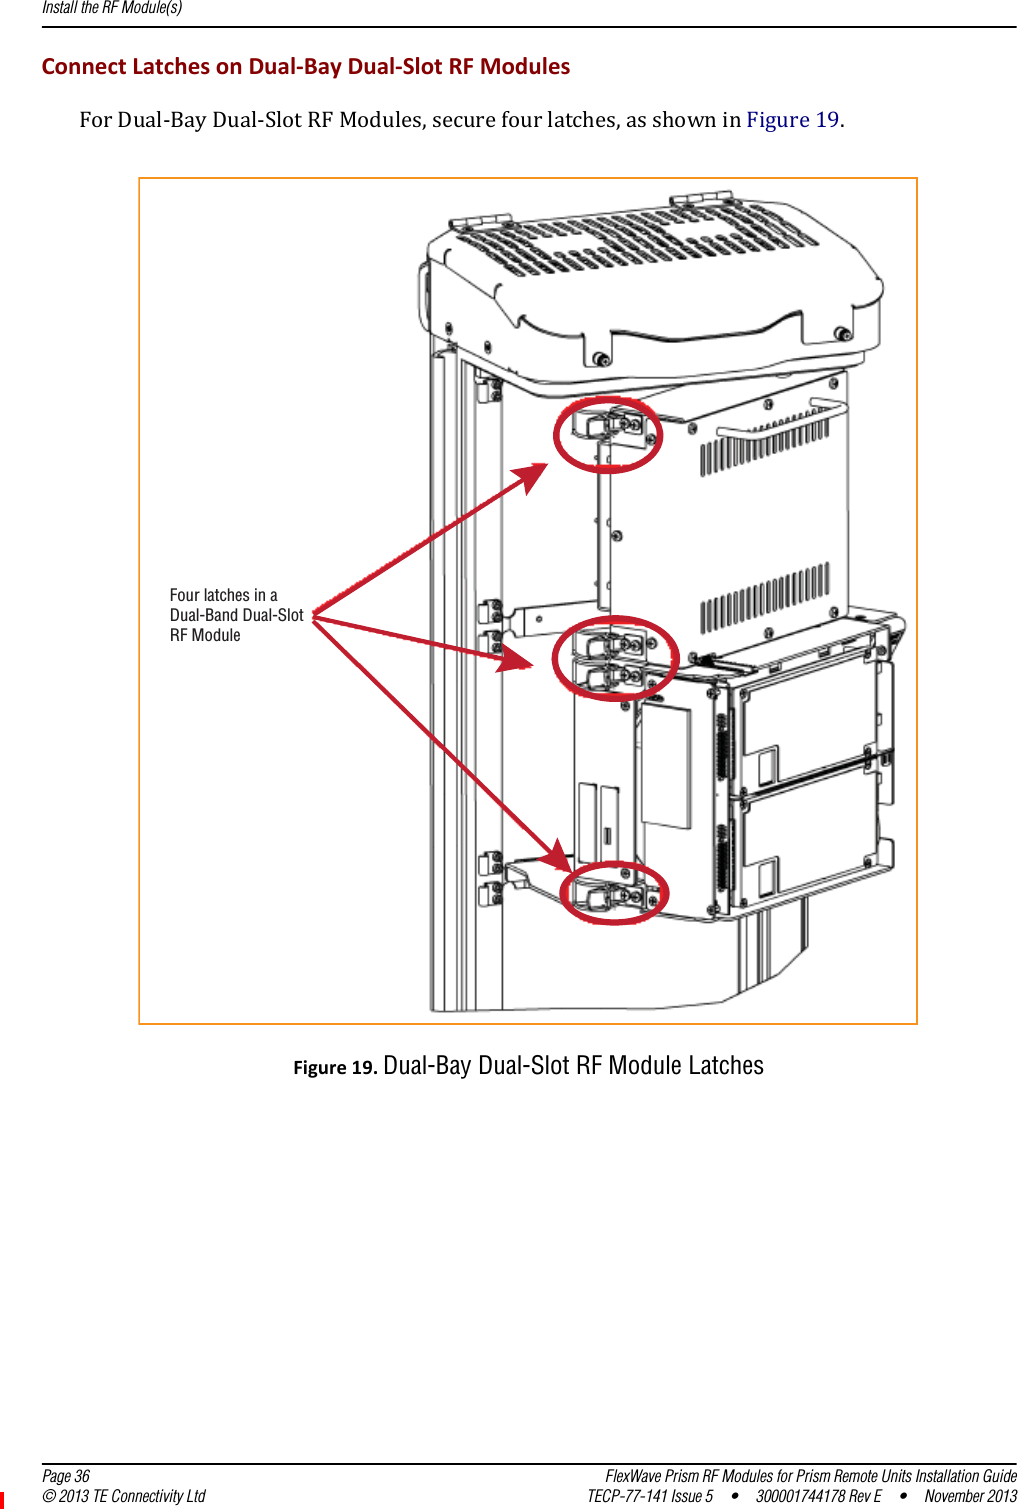 Install the RF Module(s)  Page 36 FlexWave Prism RF Modules for Prism Remote Units Installation Guide© 2013 TE Connectivity Ltd TECP-77-141 Issue 5  •  300001744178 Rev E  •  November 2013ConnectLatchesonDual‐BayDual‐SlotRFModulesForDual‐BayDual‐SlotRFModules,securefourlatches,asshowninFigure19.Figure19.Dual-Bay Dual-Slot RF Module LatchesFour latches in aDual-Band Dual-SlotRF Module